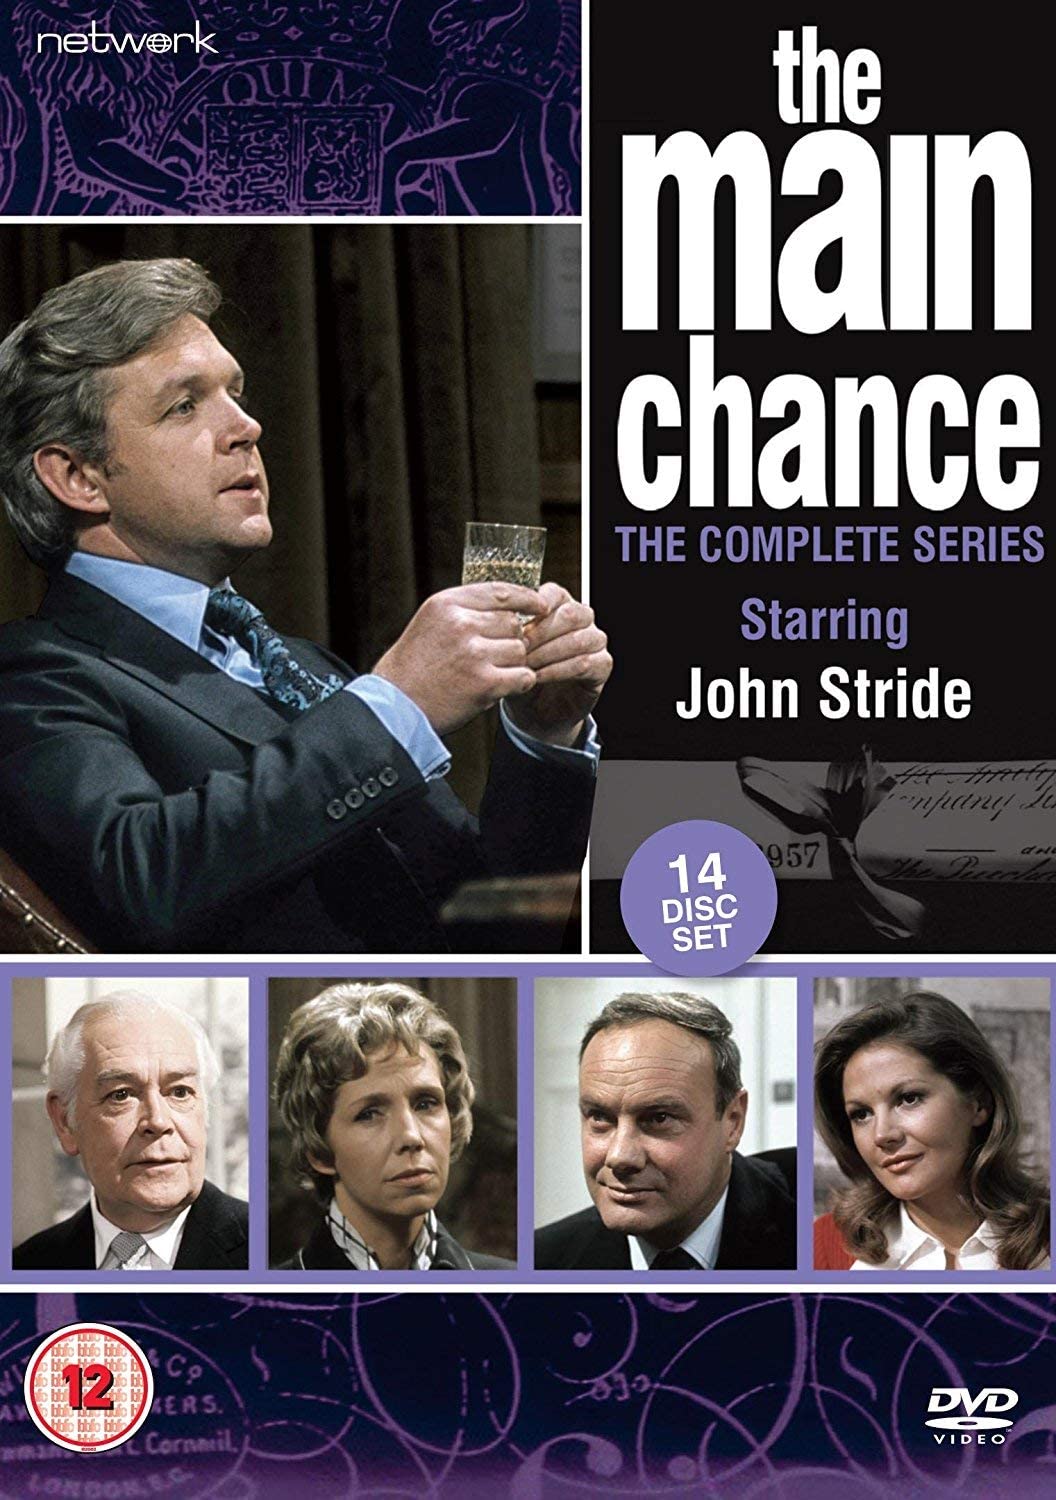 The Main Chance: The Complete Series - Drama [DVD]